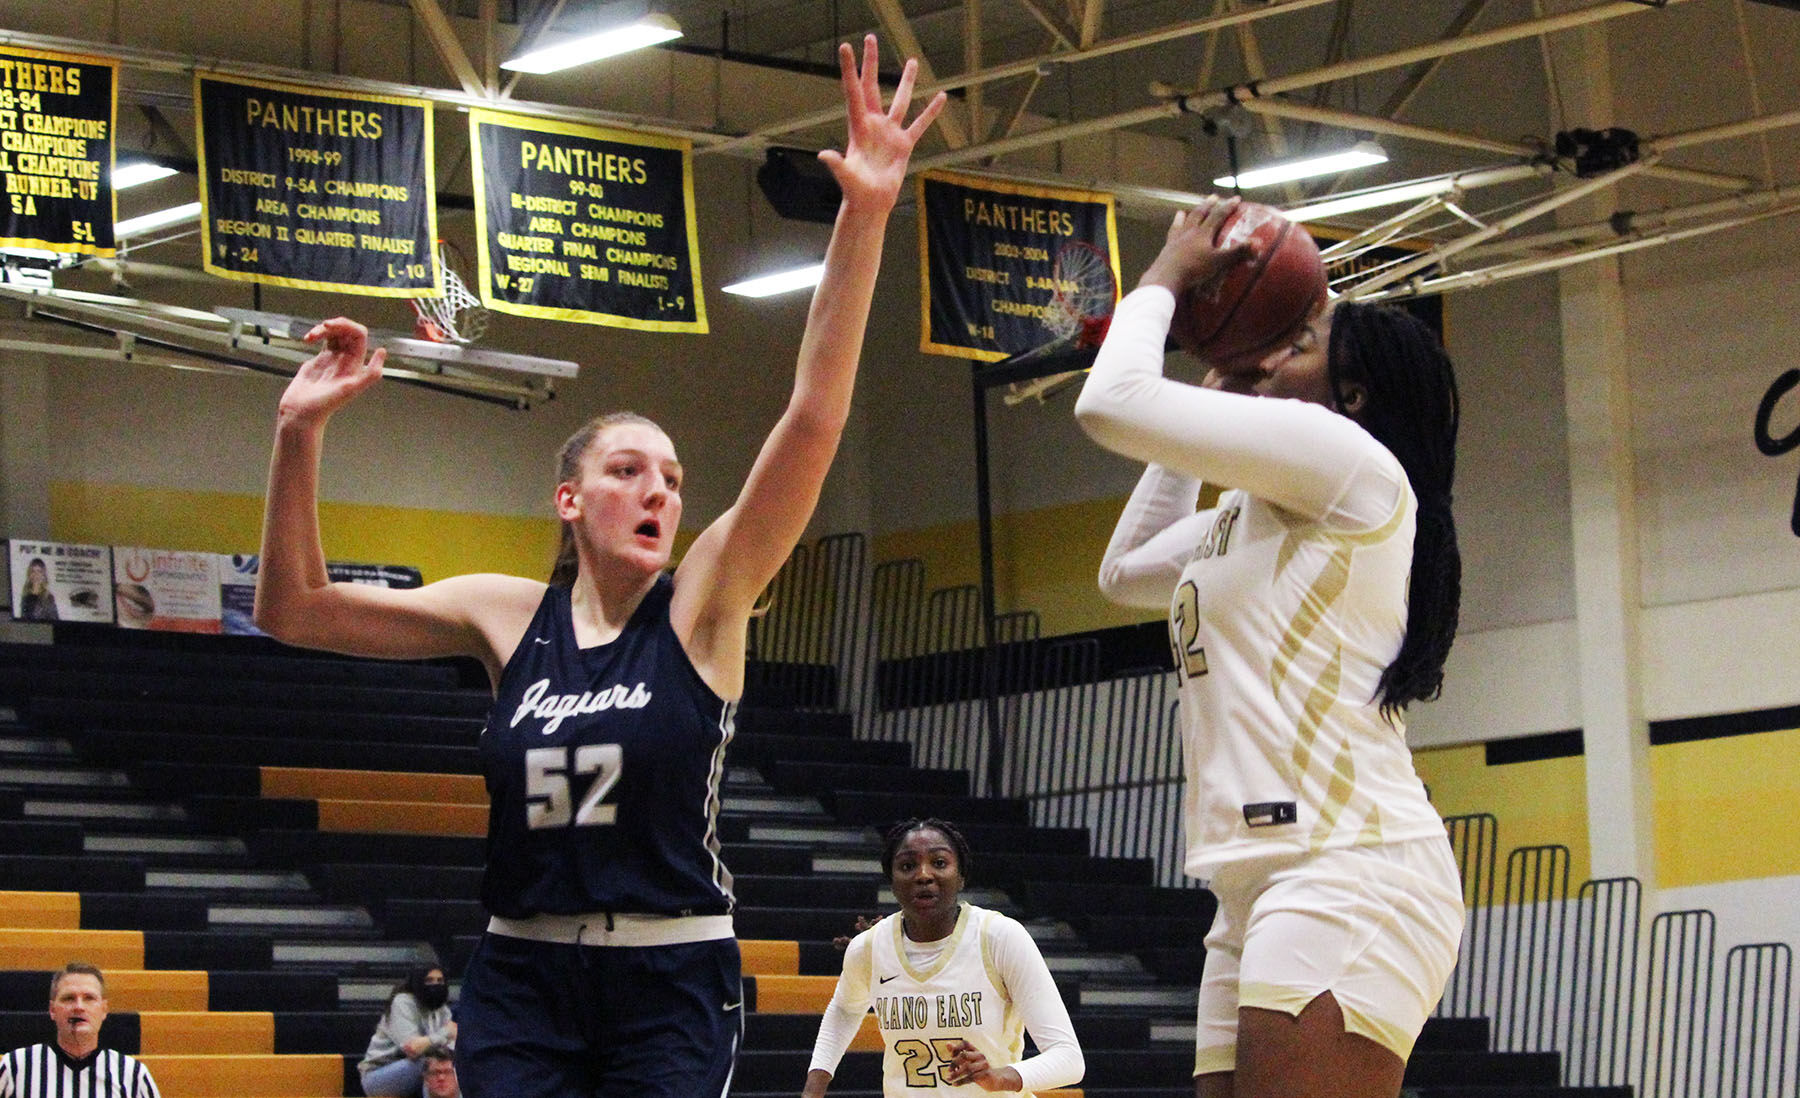 Second gear: Lady Panthers ramp up pressure, roll past Flower